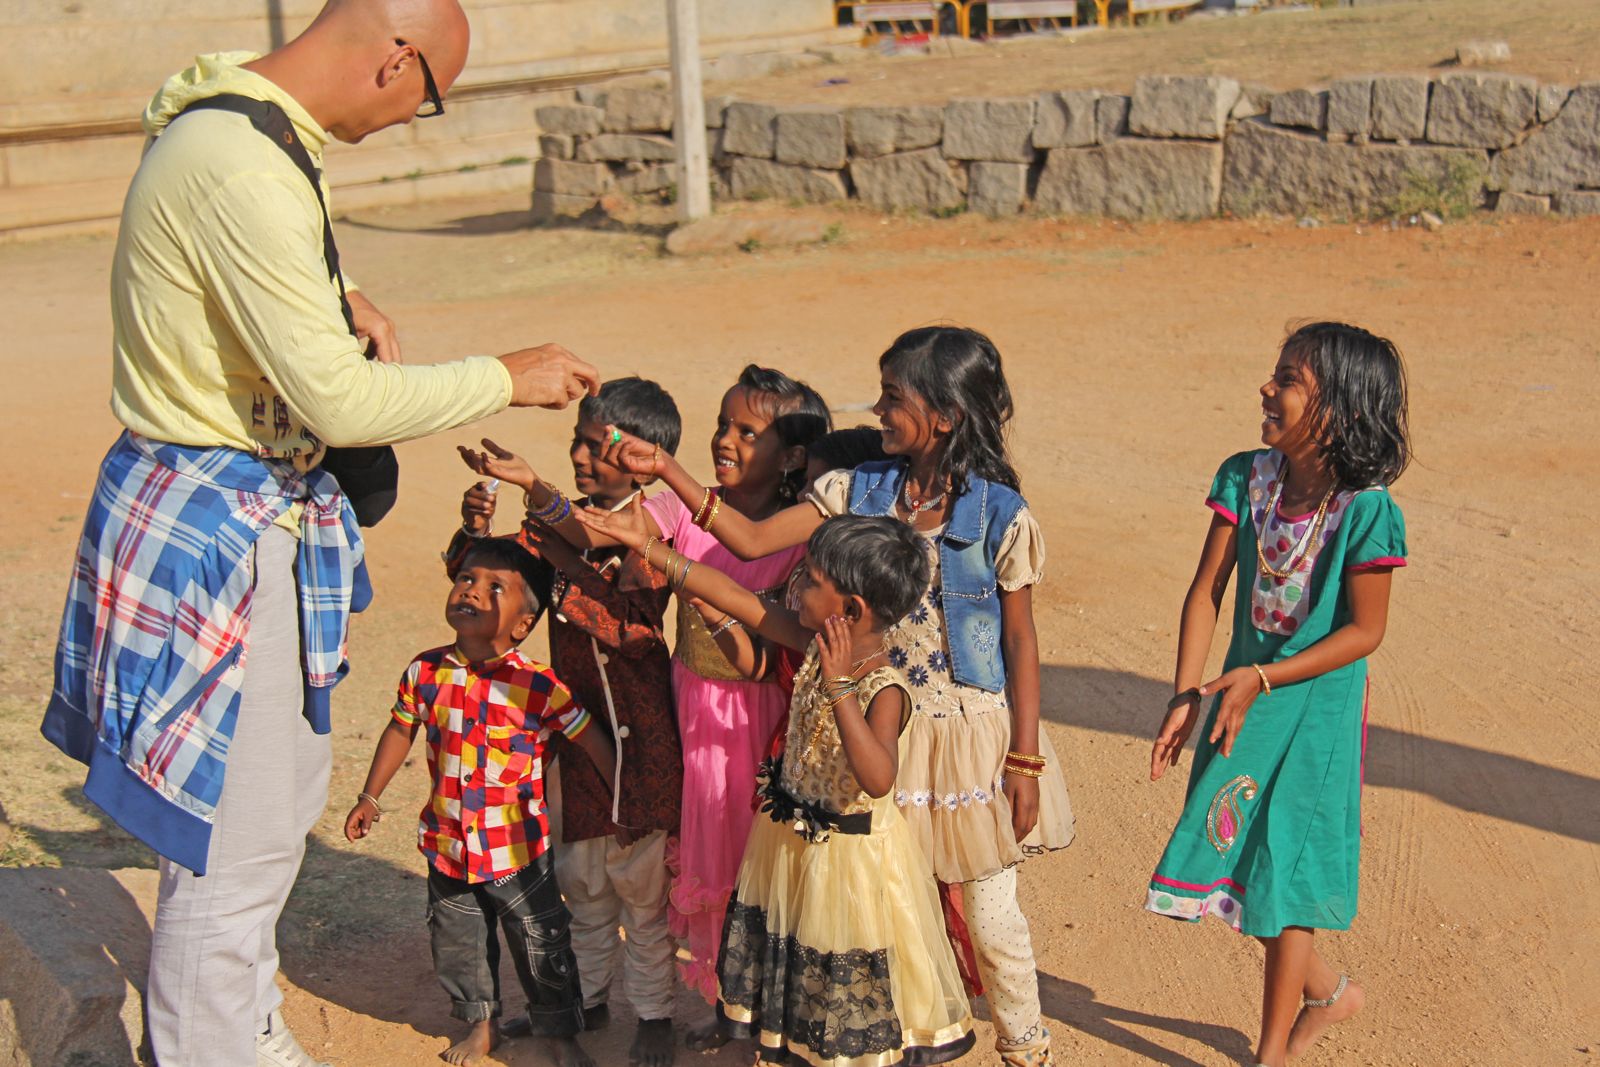 an elderly Indian man handing out sweets to children